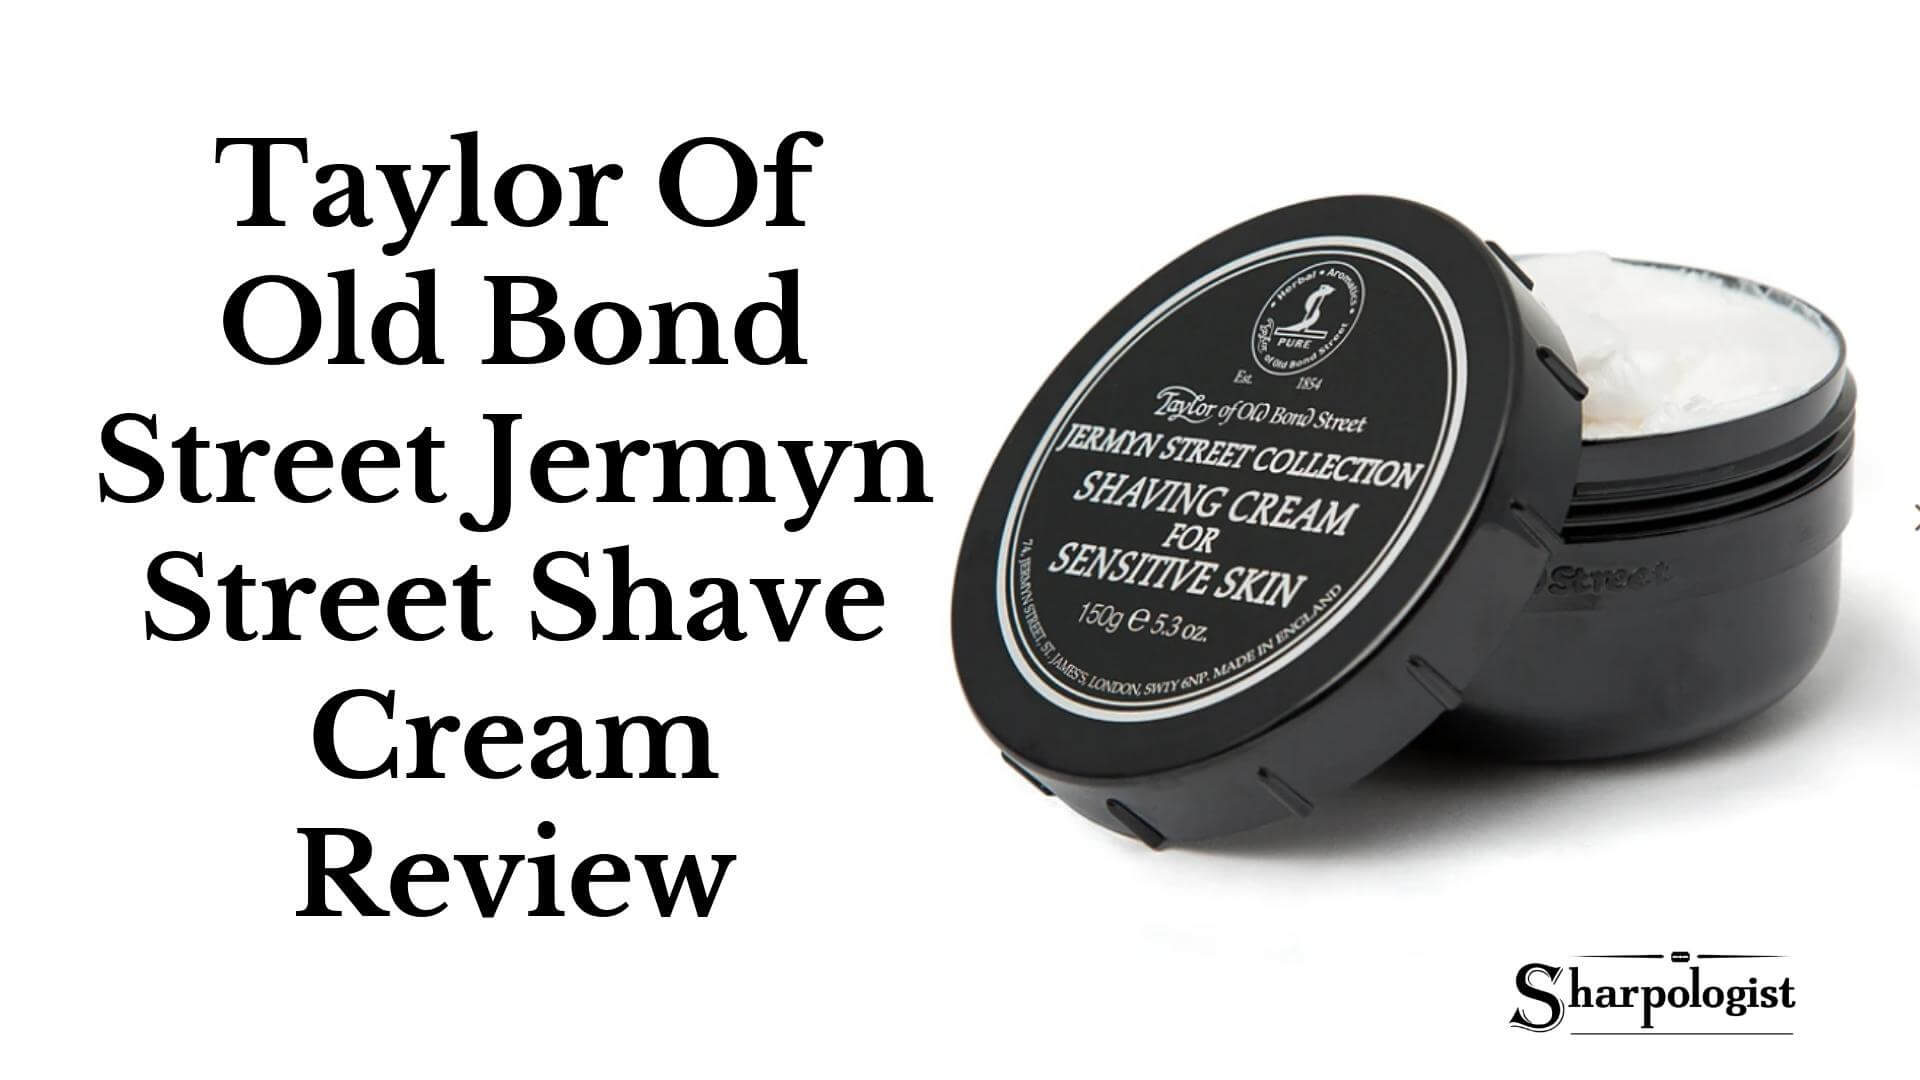 Shave Street Bond Taylor Of Jermyn Street Cream Review Old